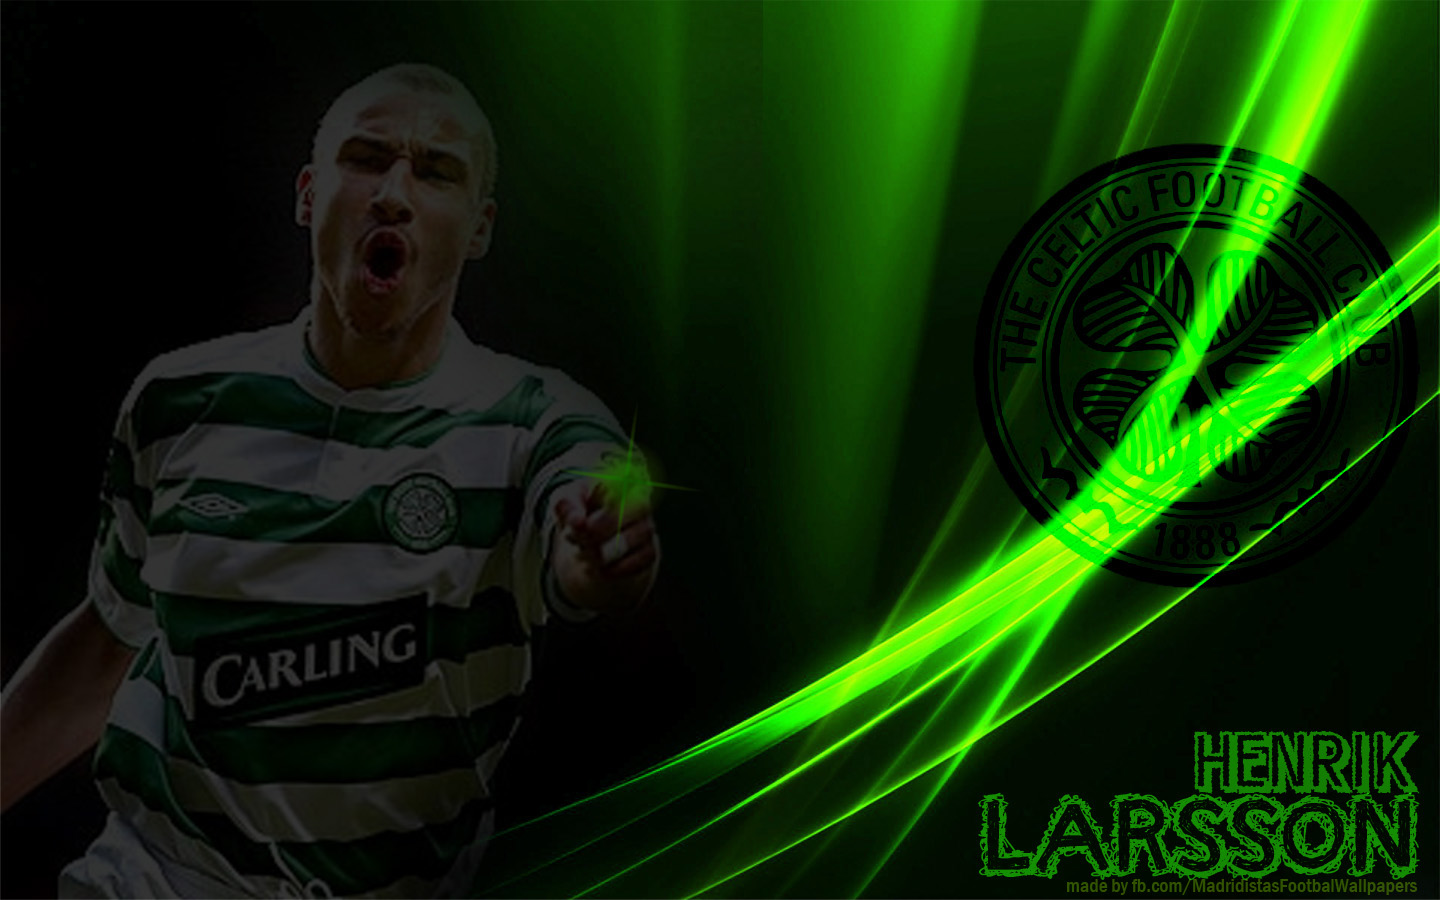 Henrik Larsson Wallpaper 5. The Celtic Footsoldiers 9 In A Row